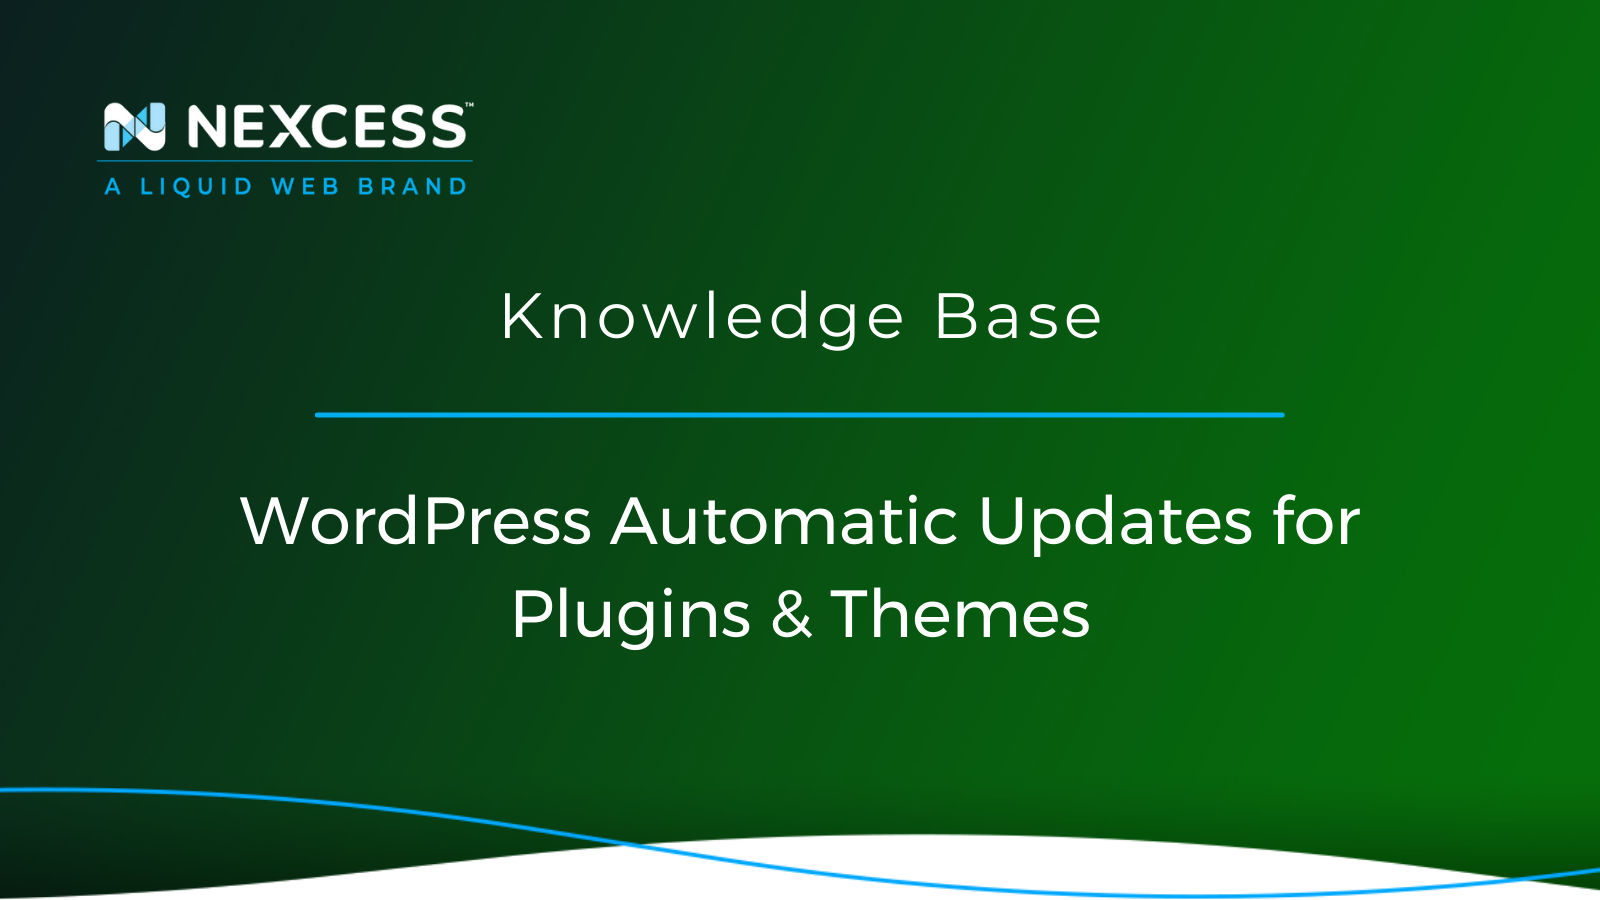 WordPress Automatic Updates for Plugins & Themes